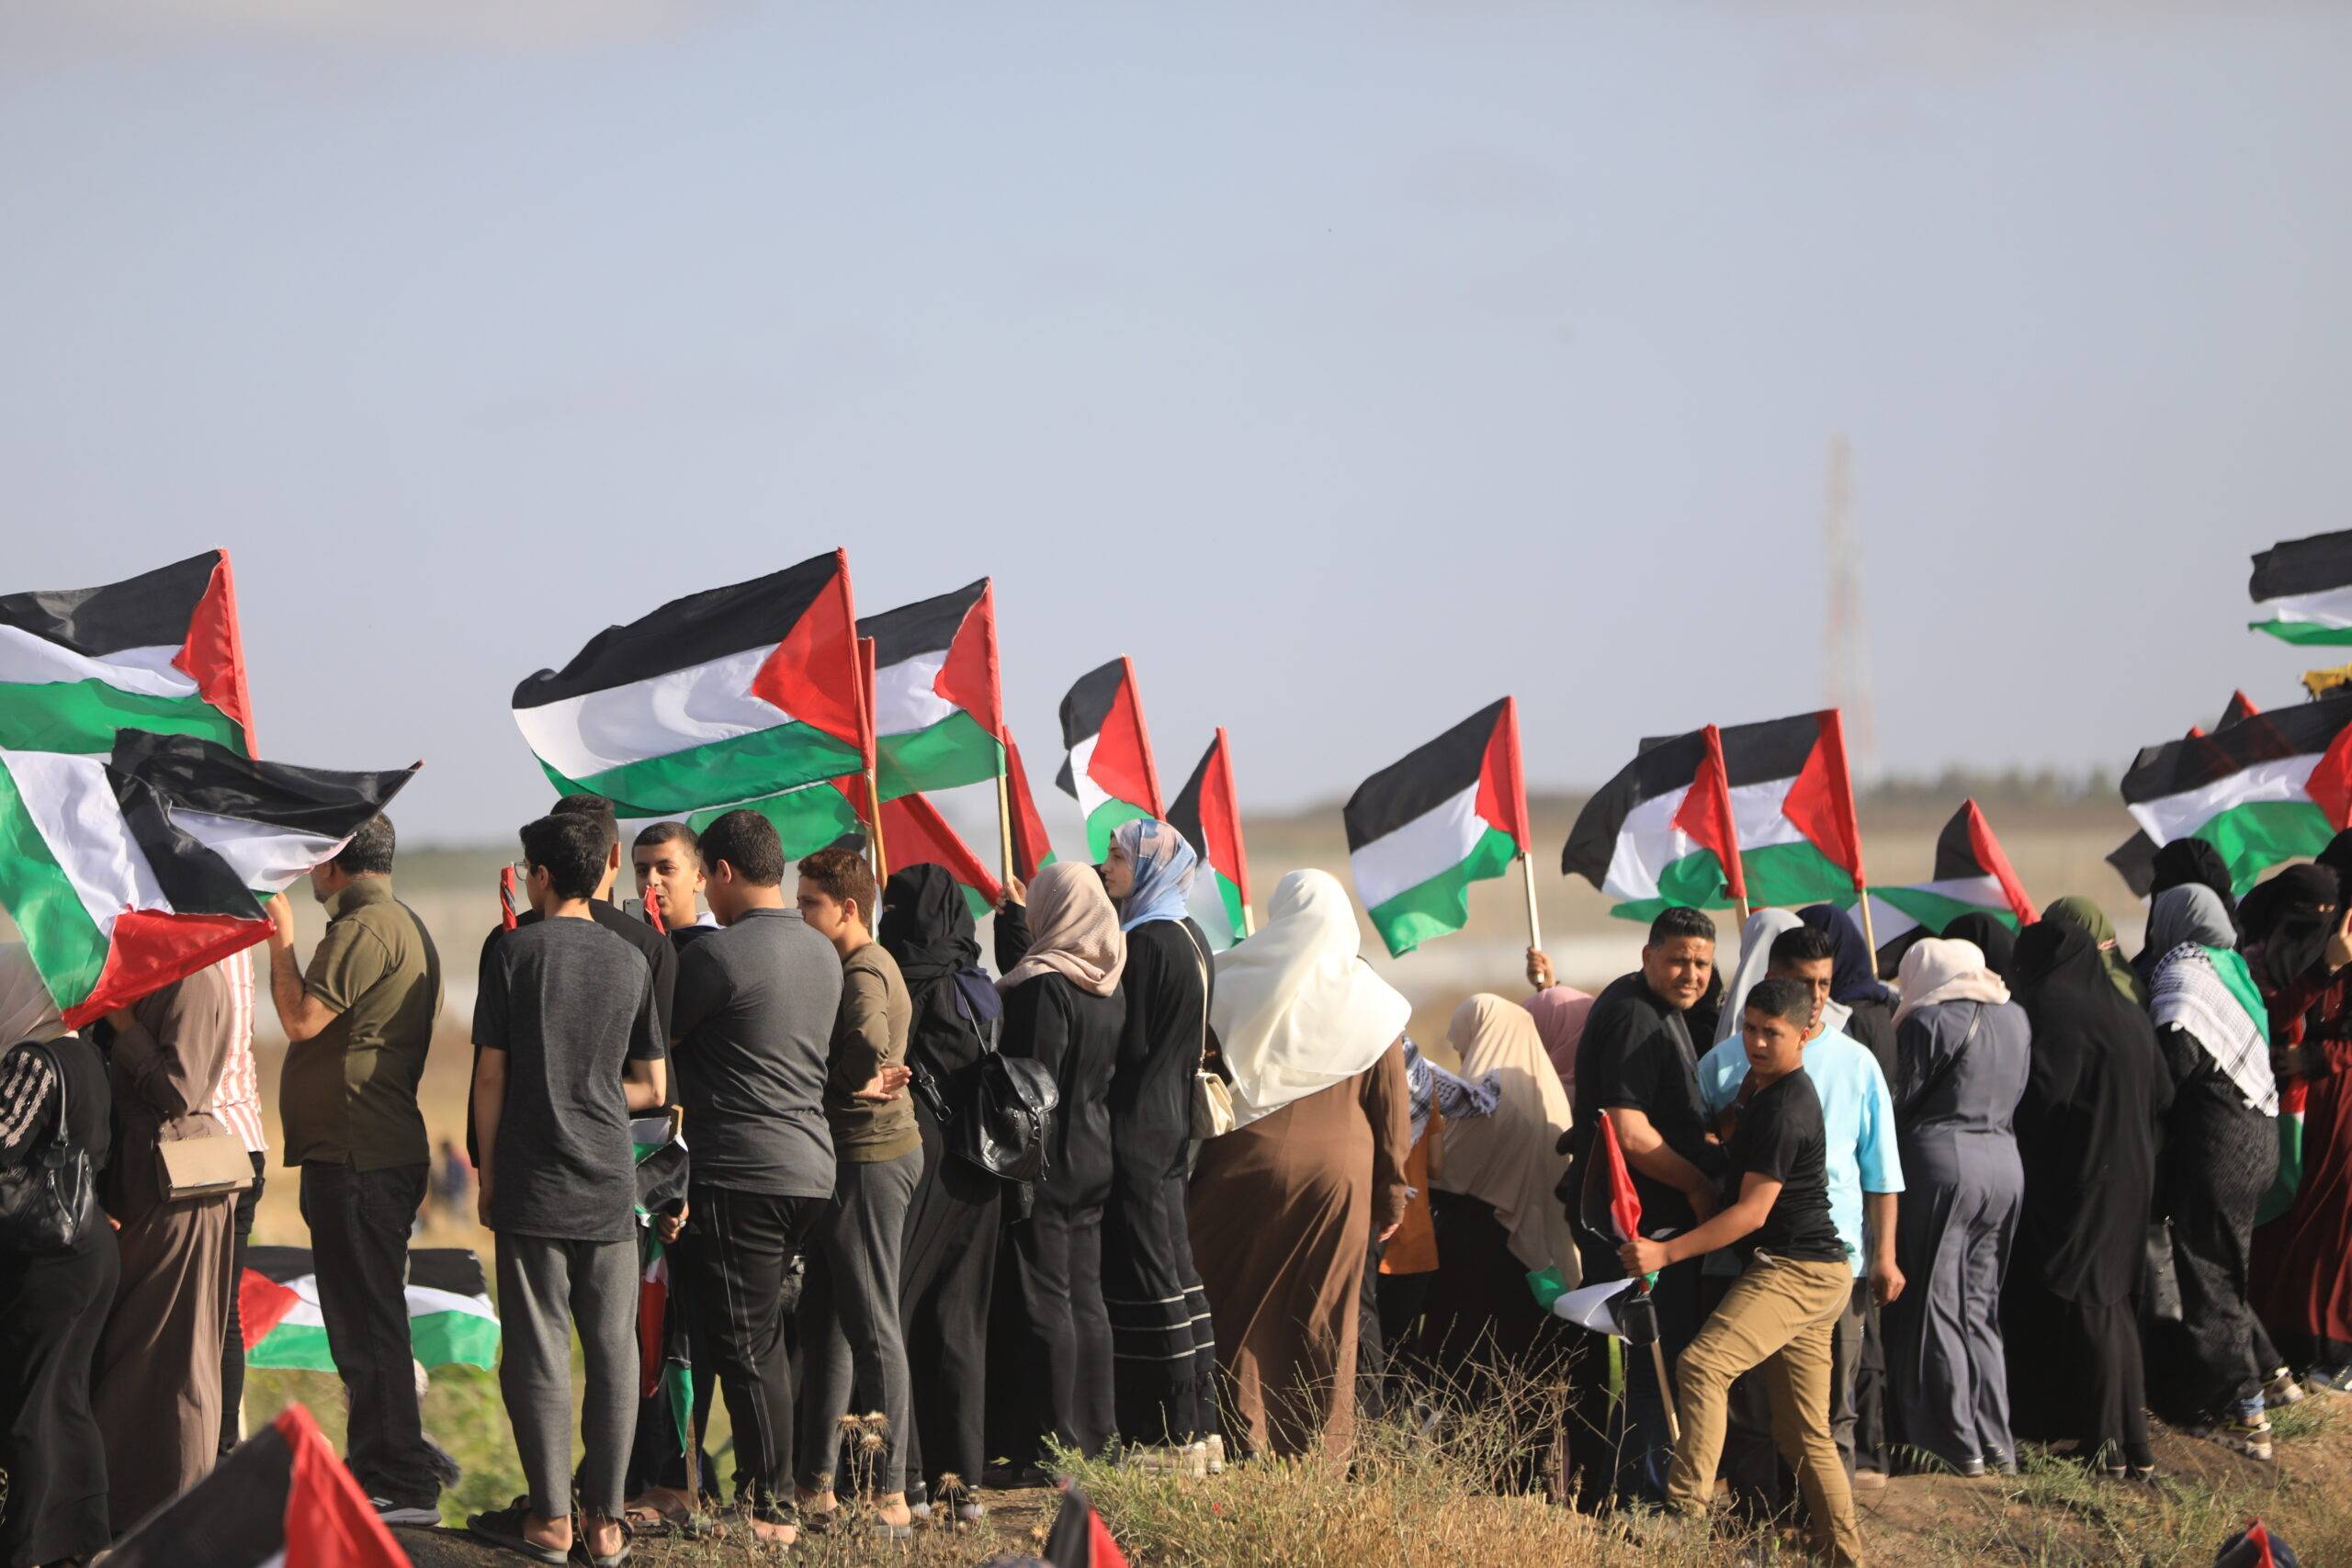 Thousands of Palestinians protests along the fence separating Gaza from Israel against the racist Flag March taking place in occupied East Jerusalem on 18 May 2023 [Mo Asad / MiddleEastMonitor]